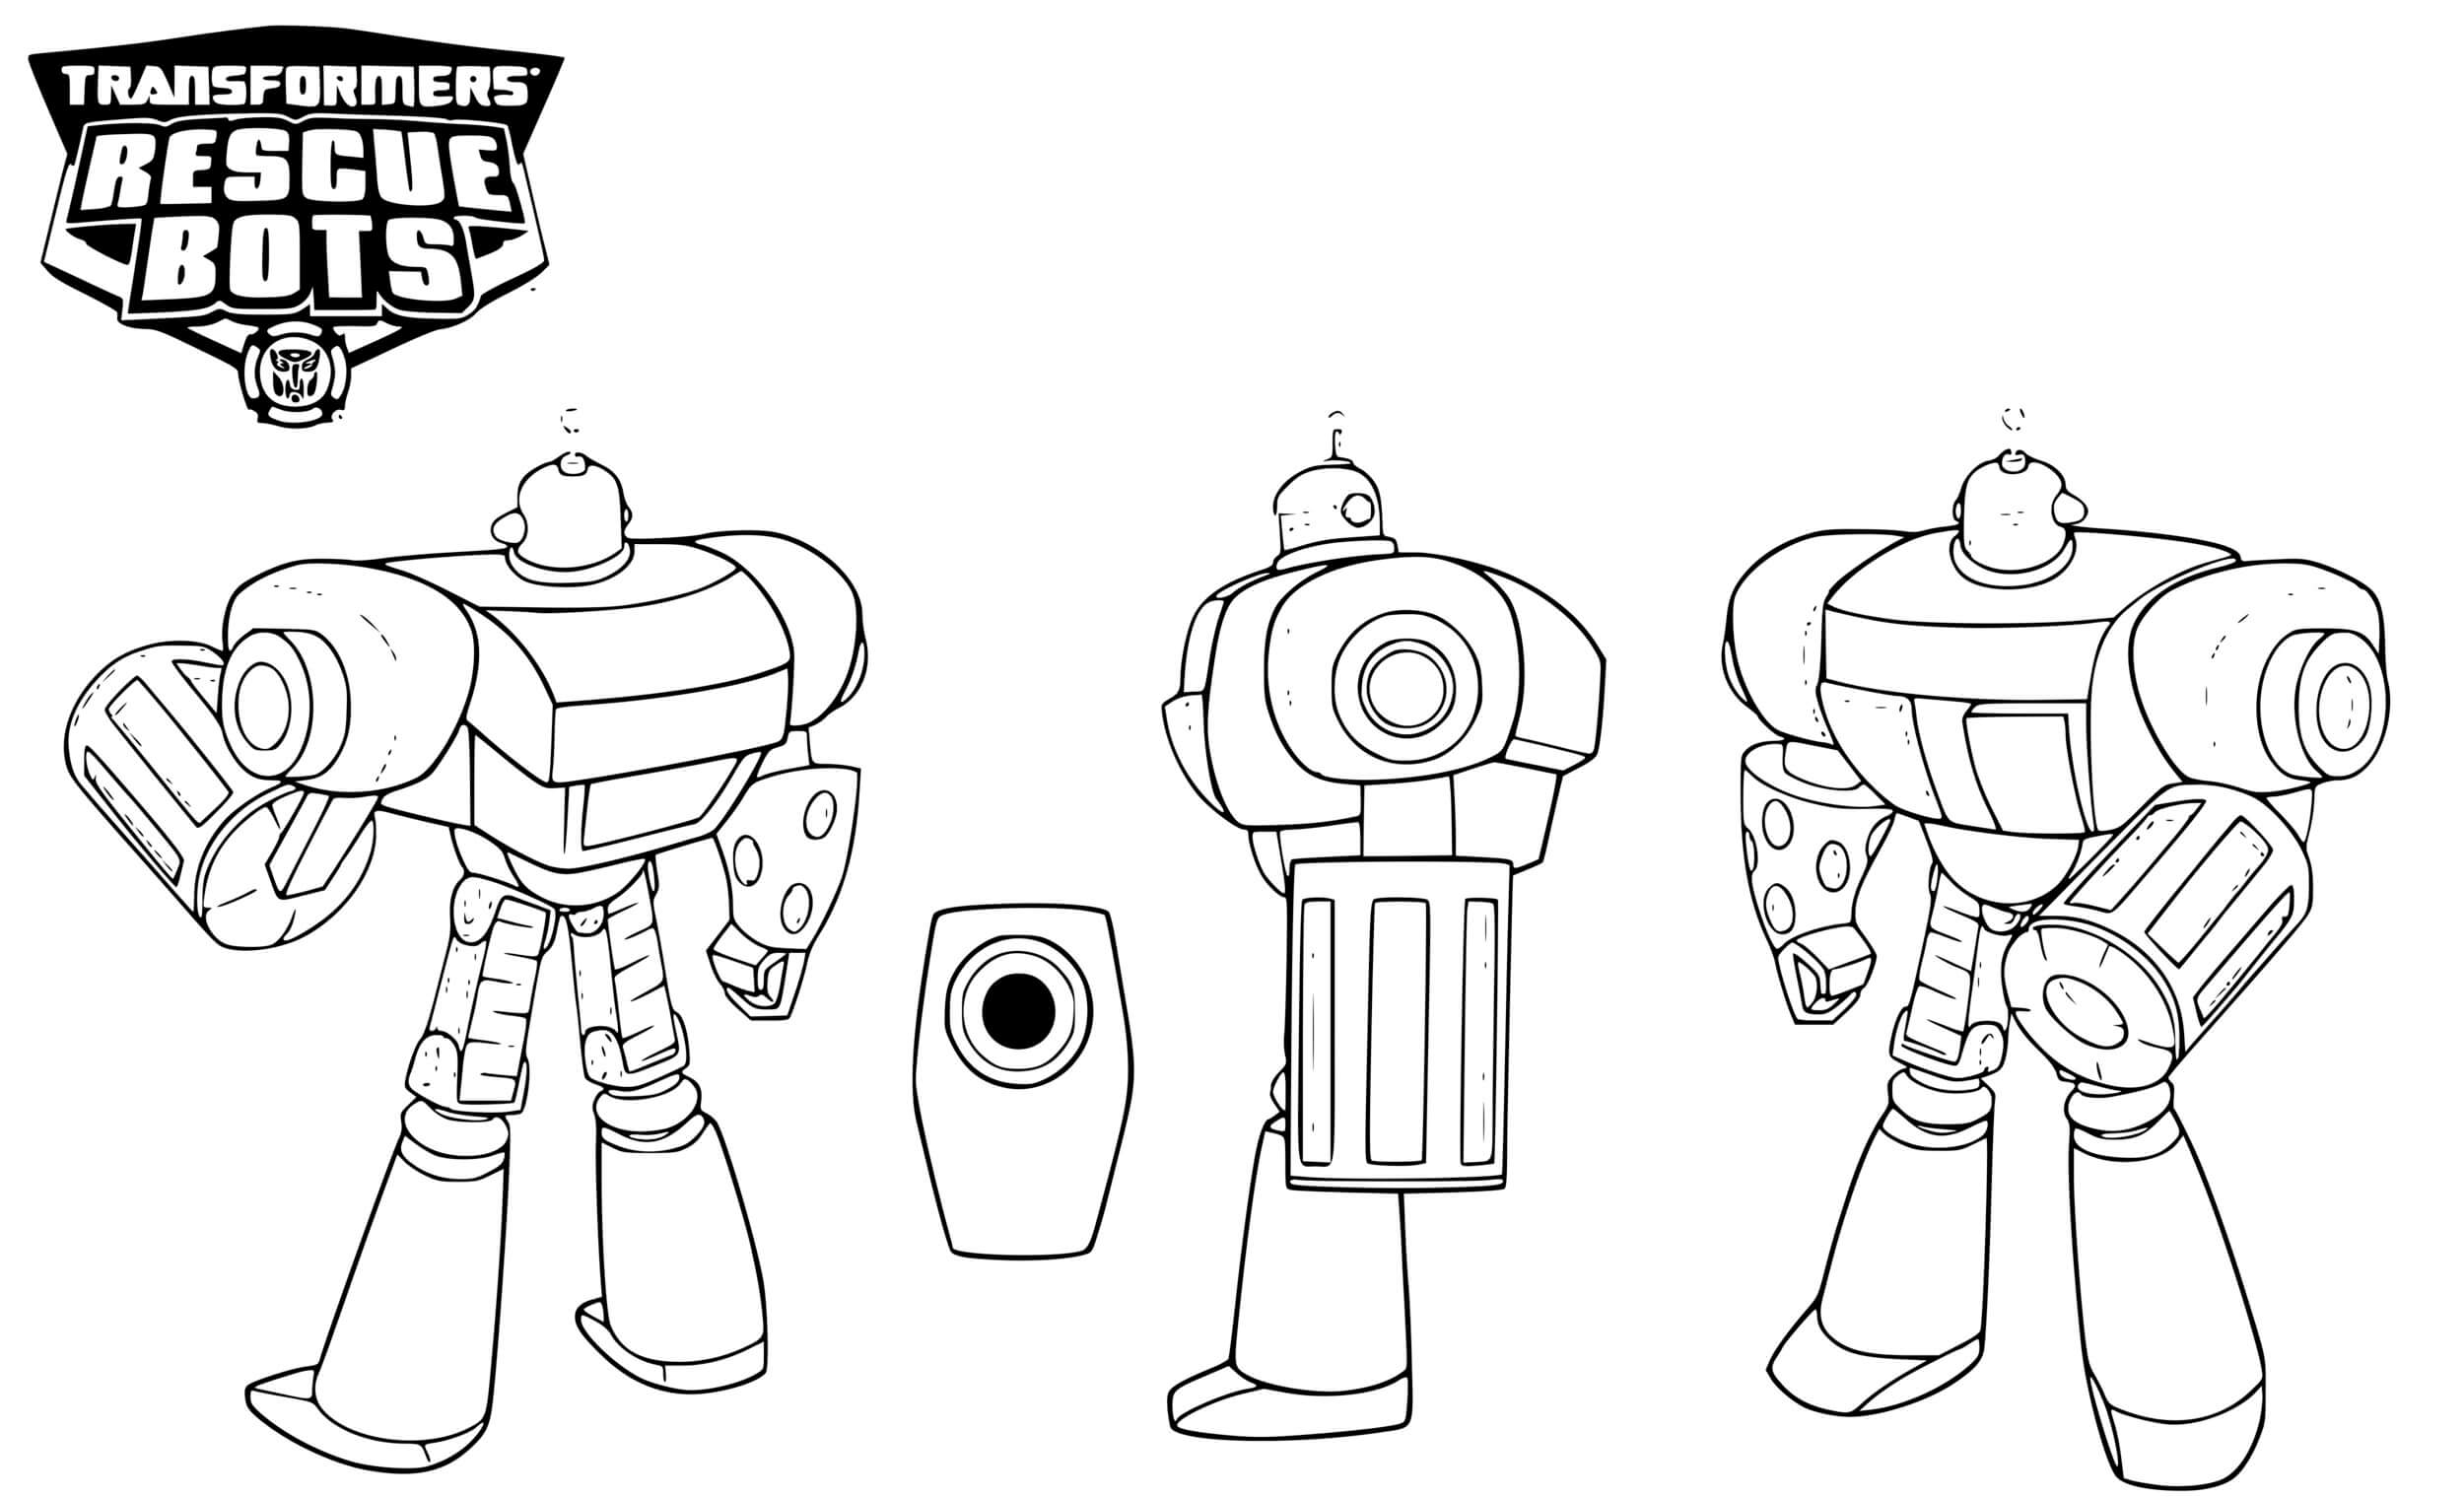 Transformers Rescue Bots Morbot